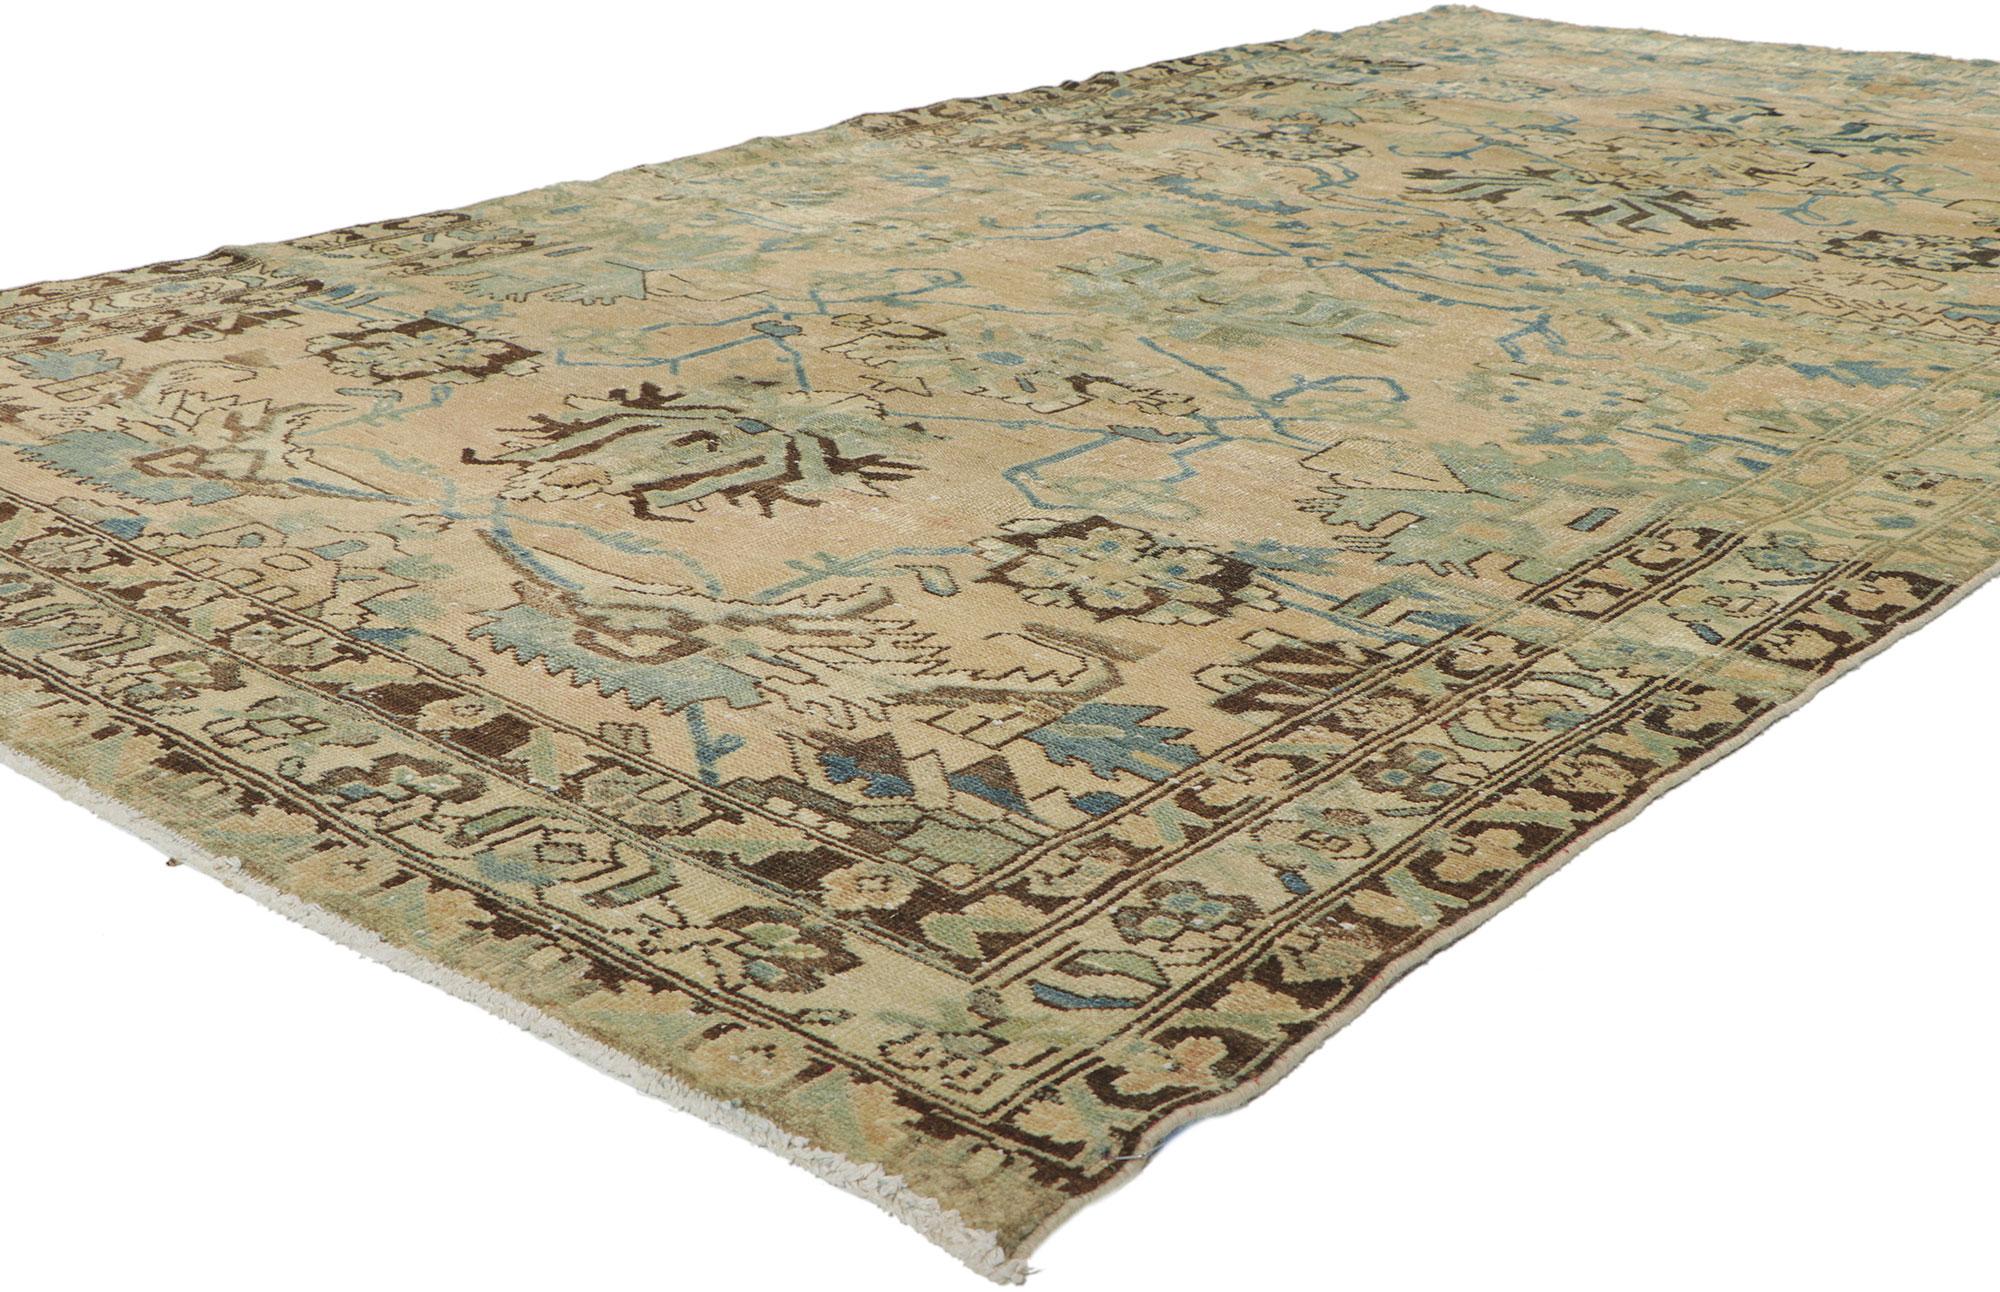 60954 Vintage Persian Hamadan rug, 05'05 x 09'08. With its effortless beauty and timeless design, this hand-knotted wool vintage Persian Hamadan rug is poised to impress. The eye-catching Herati pattern and sophisticated color palette woven into